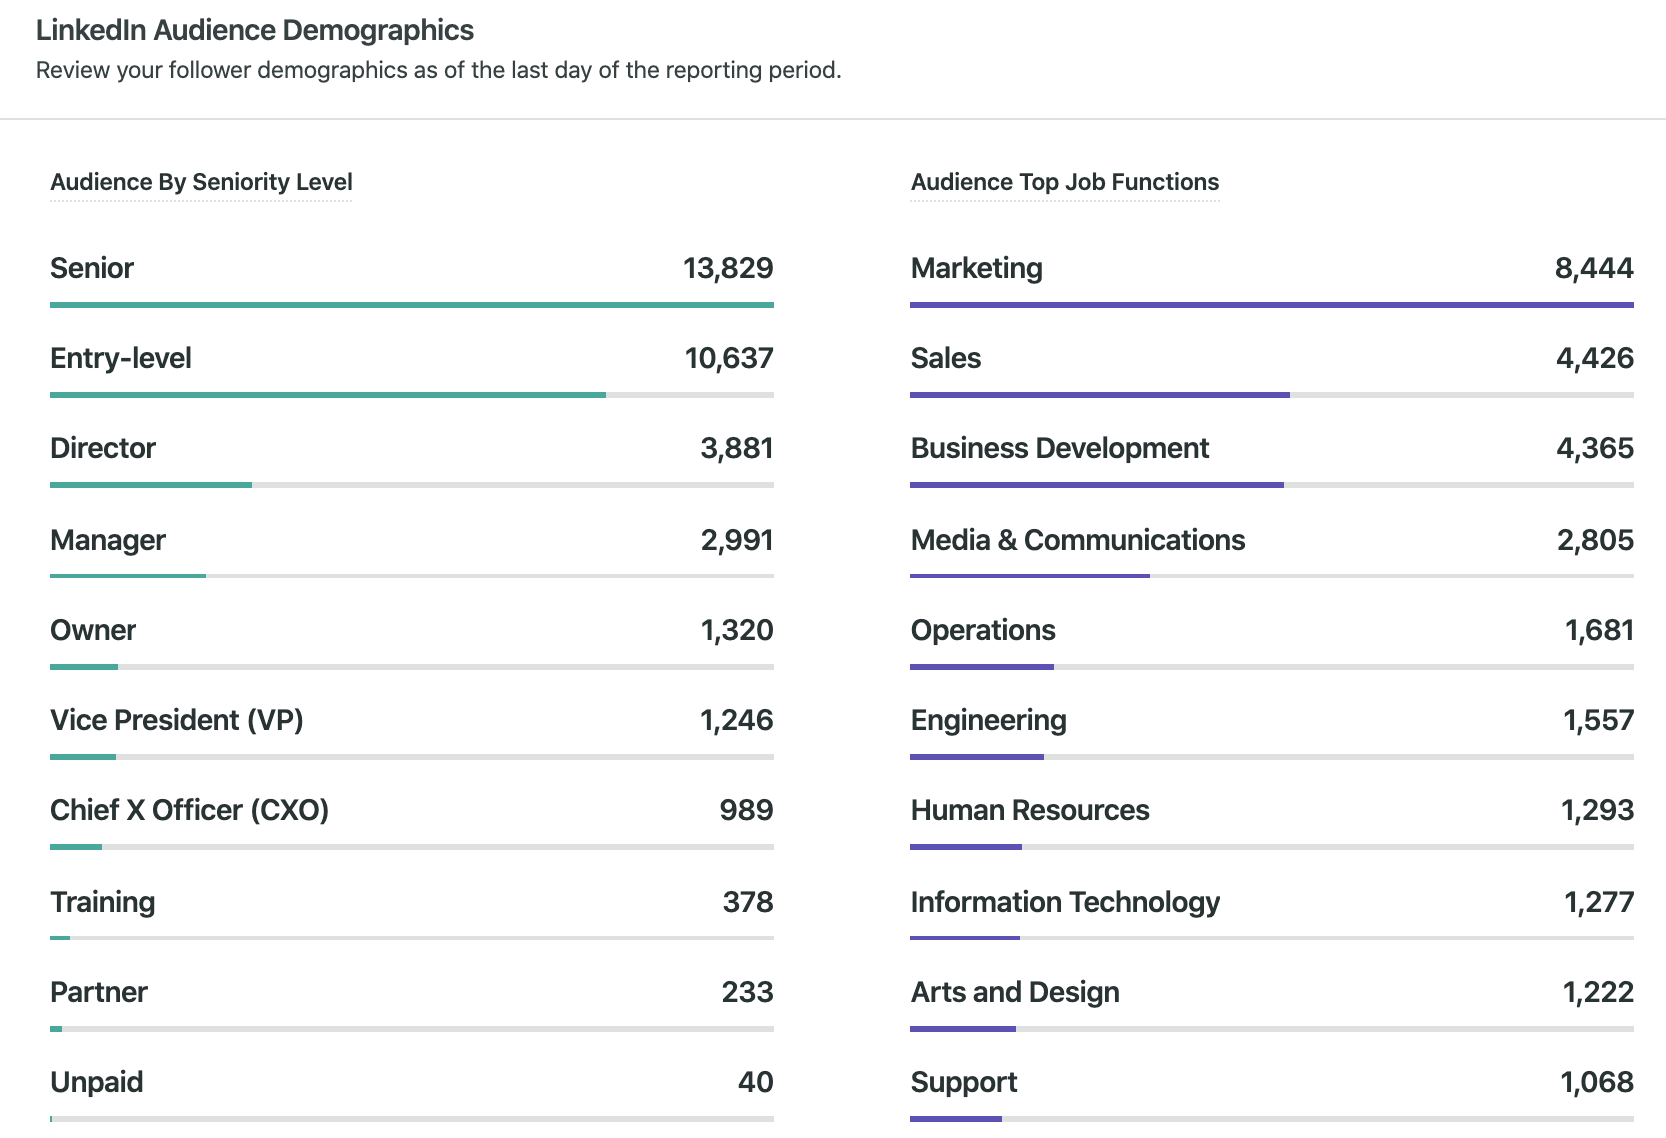 Sprout Social's LinkedIn Audience Demographics Report, showing audience by seniority level and top job functions. 